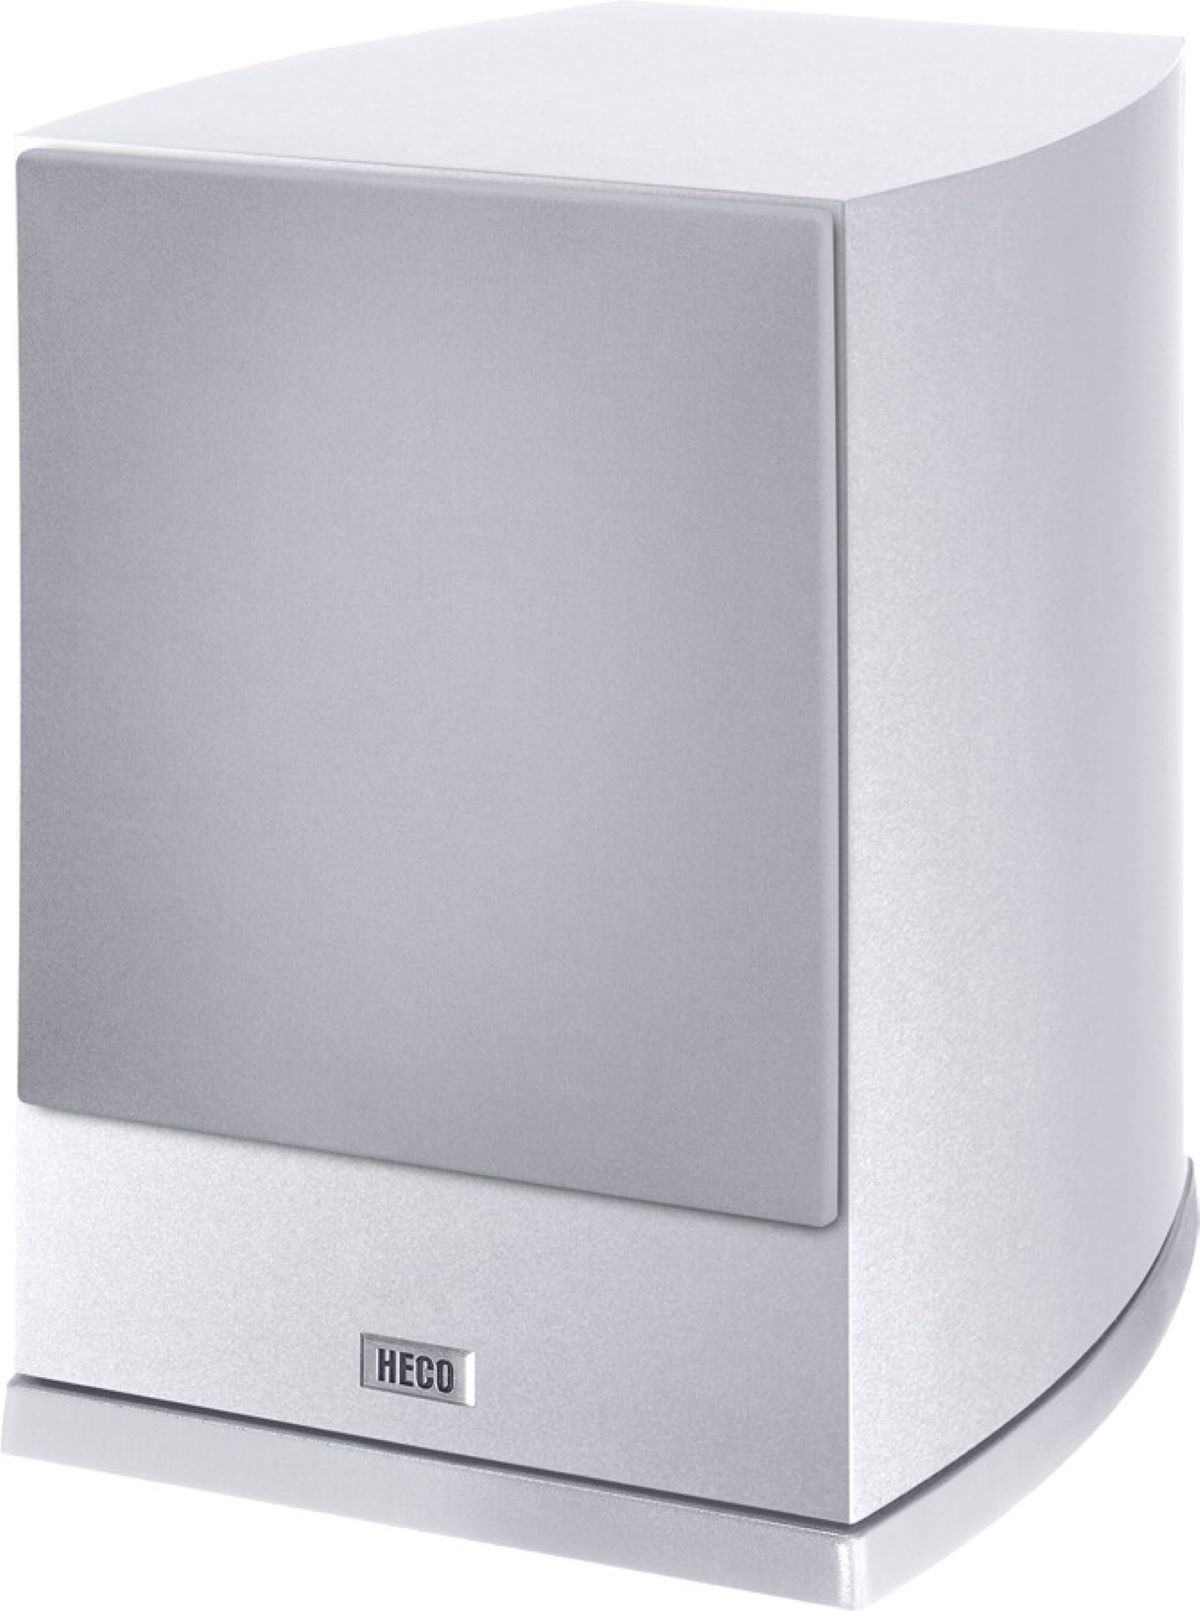 ELITE HECO SUB 252A VICTA weiss Subwoofer,